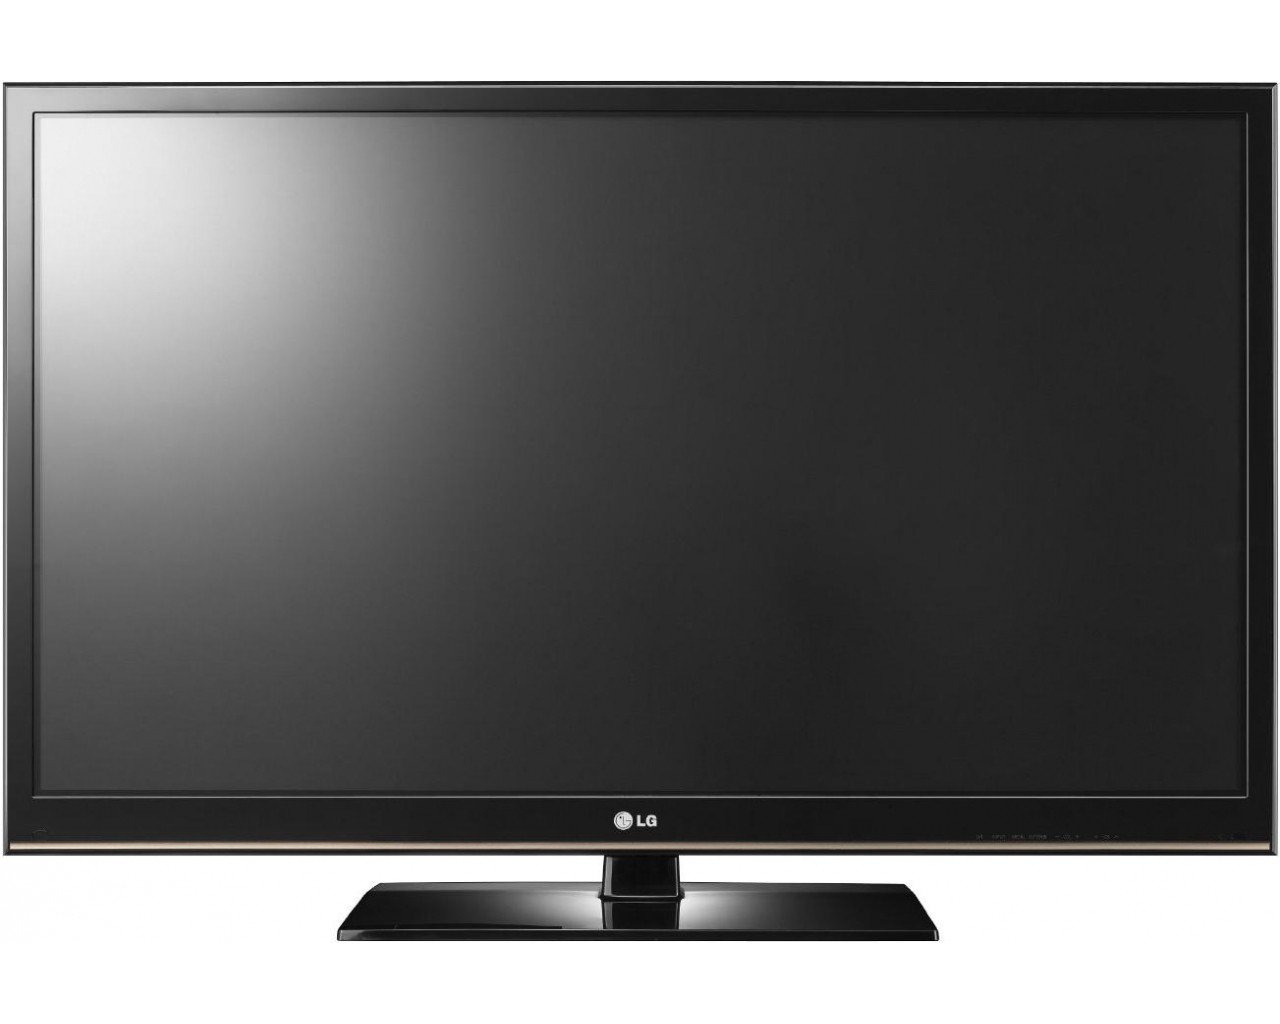 Picture Download Television Tv